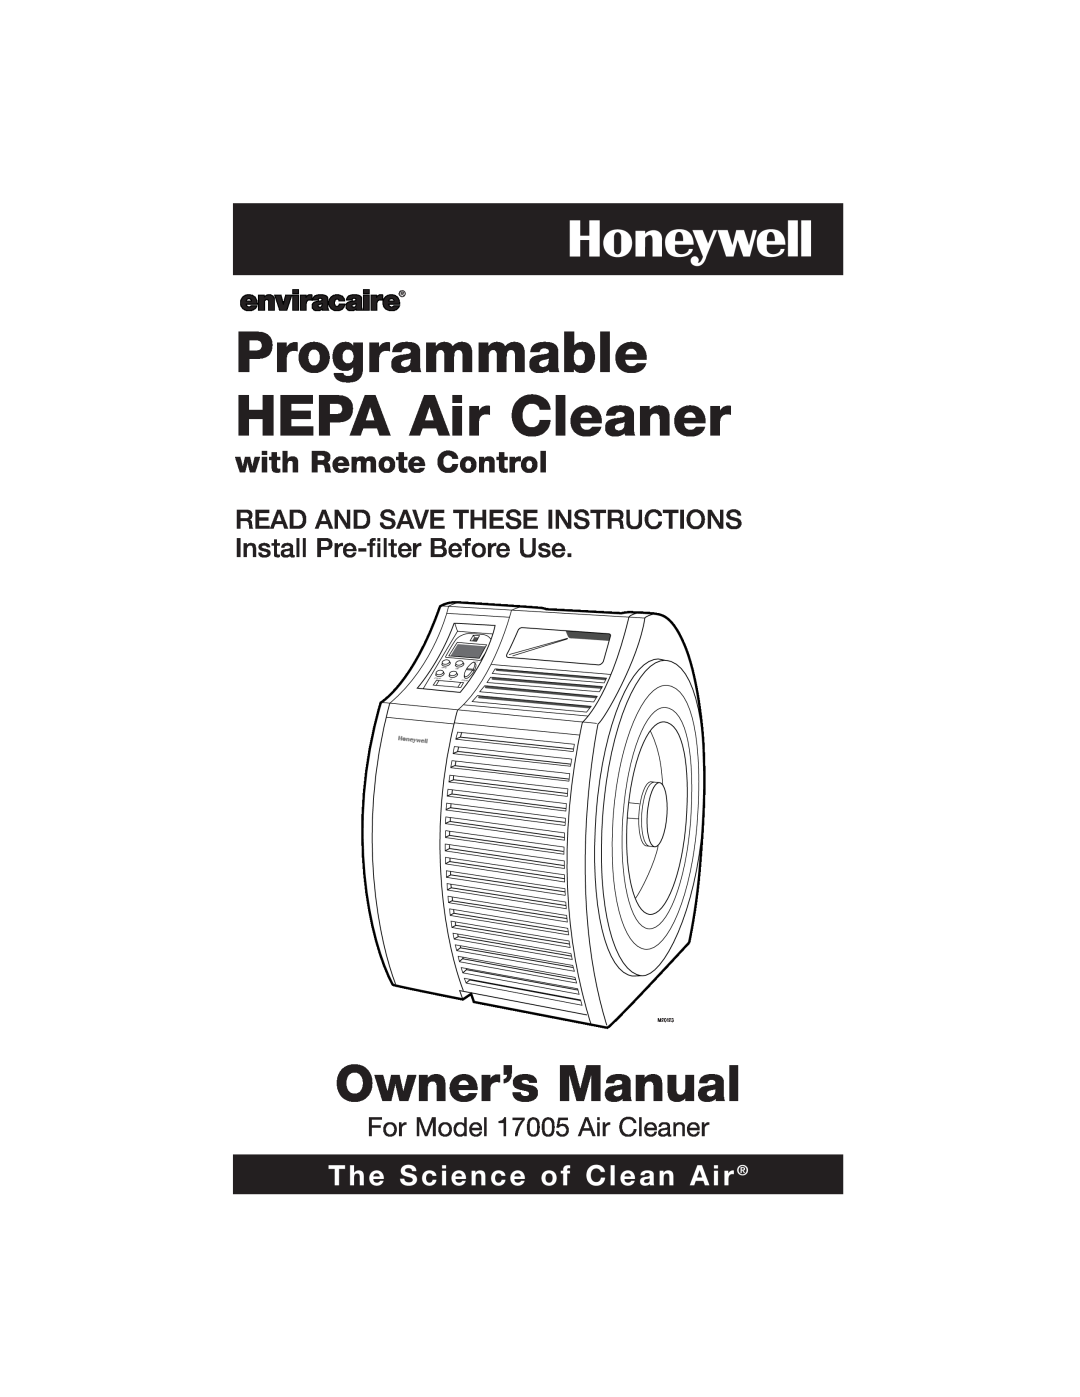 Honeywell owner manual Programmable HEPA Air Cleaner, with Remote Control, For Model 17005 Air Cleaner, M20123, hours 